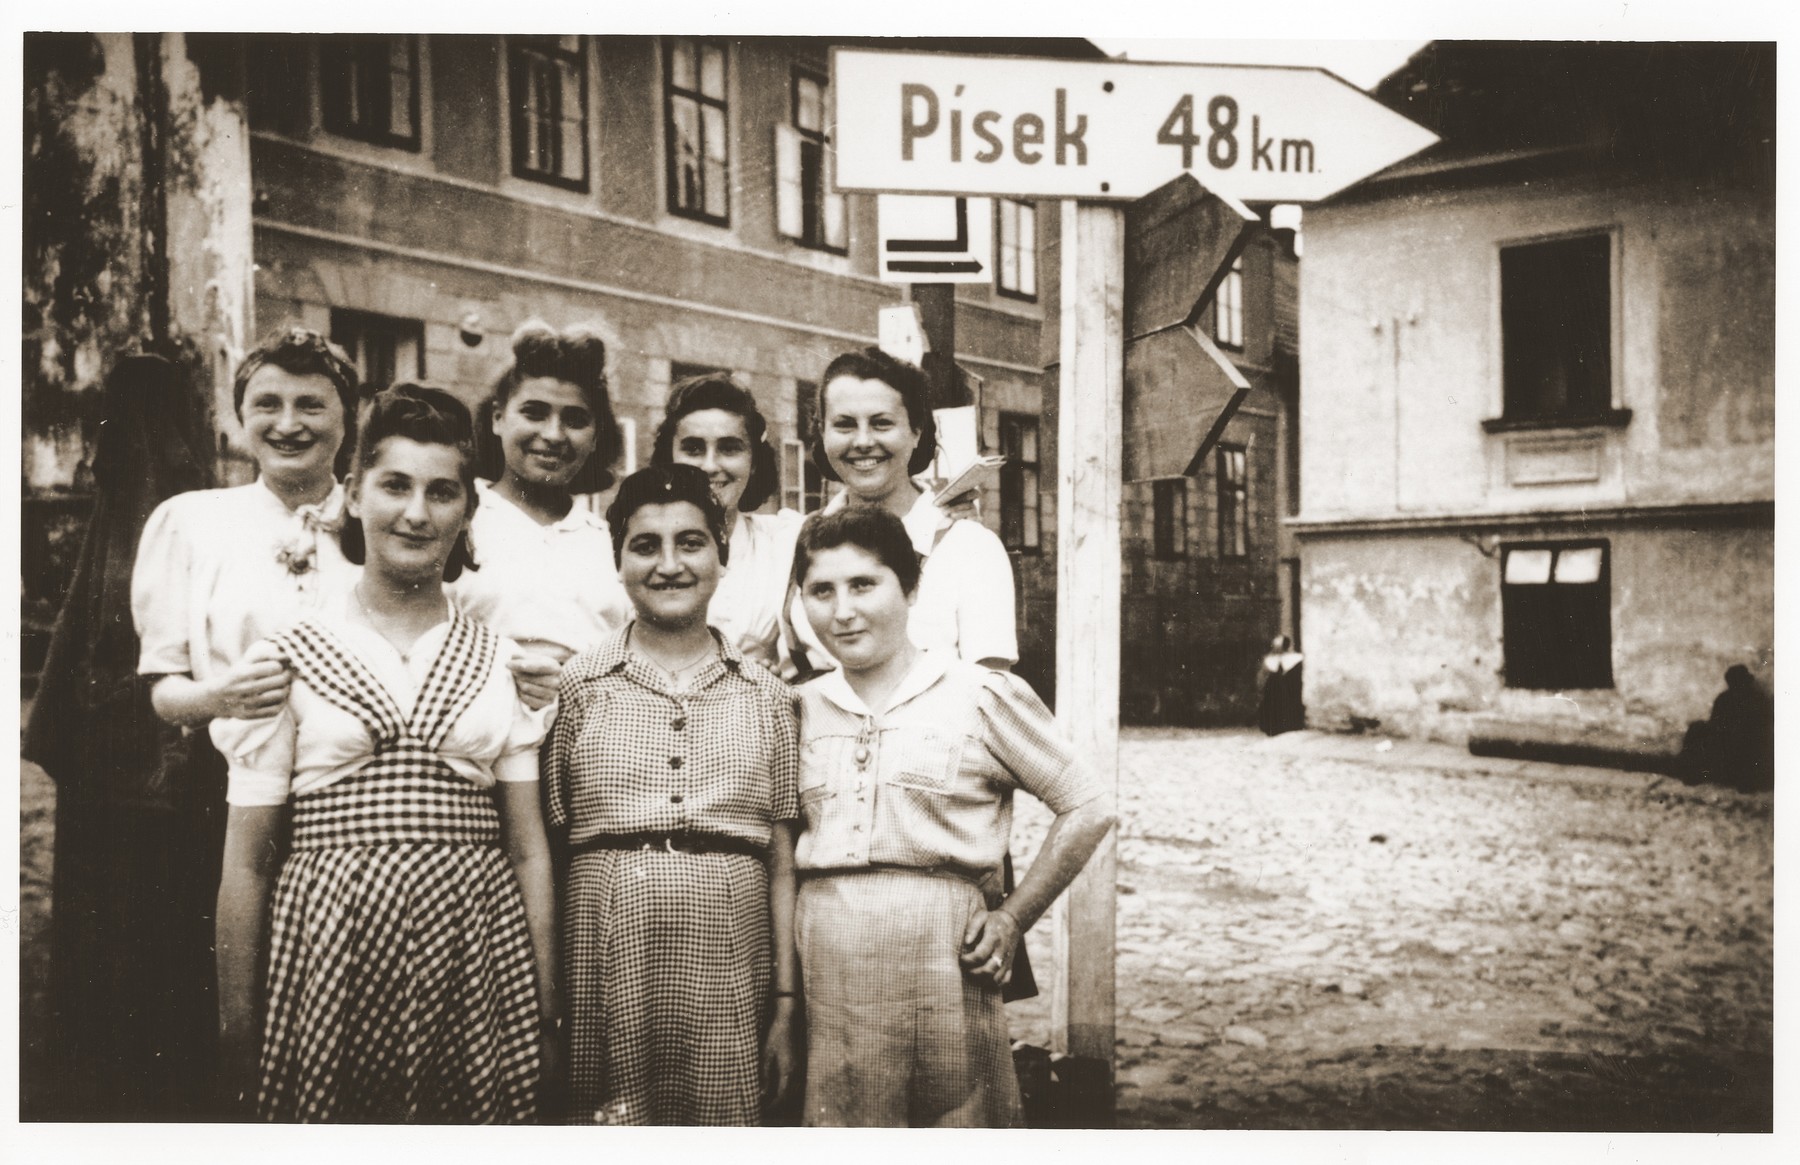 Seven of the approximately 150 survivors of a 500 km. death march that ended in Volary.  These Jewish survivors are recuperating in Prachatice, near Volary. 

Pictured from left to right in the front row are: Hela Malinowicz (Malnowicer Bleeman) (from Dabrowa); Rachela Raabe; and Regina Szapelska (from Sosnowiec).   In the back row, left to right are: Hela Dancygier; Lilka Silbiger (from Oswiecim); Fela Lewy; and Fela Zyngler (from Lodz).